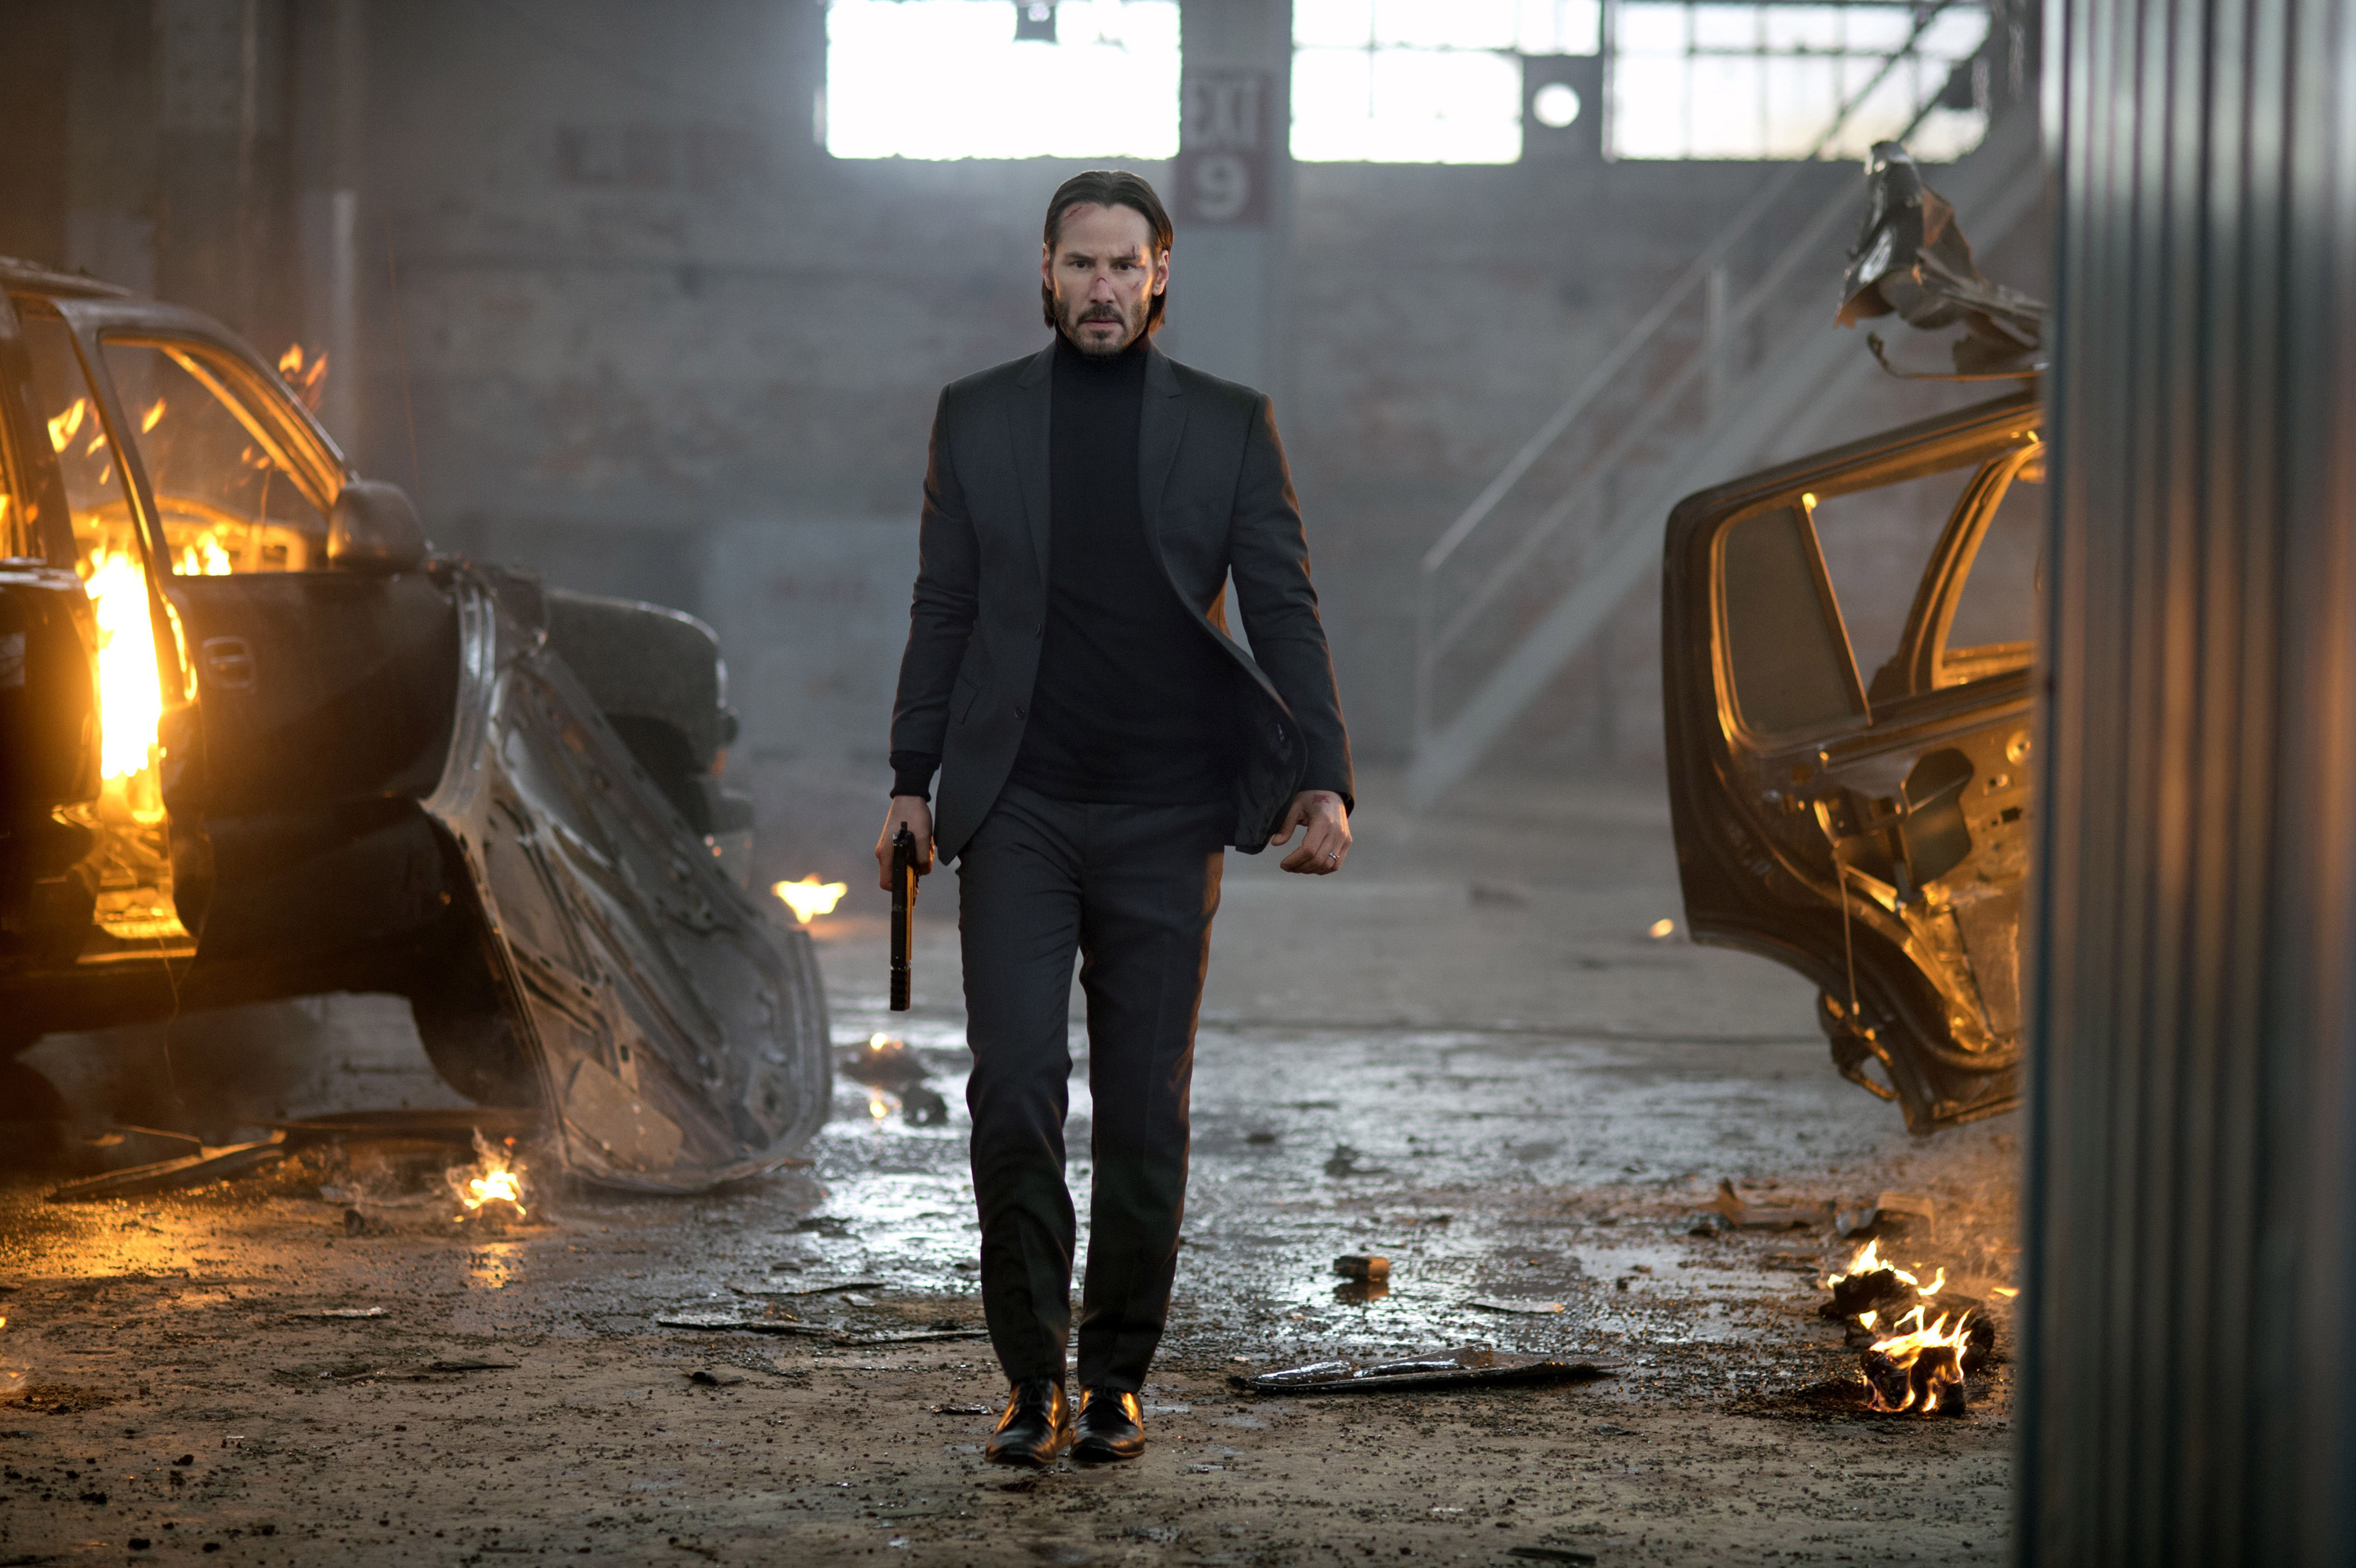 Reeves revs up action in ‘John Wick: Chapter 2’